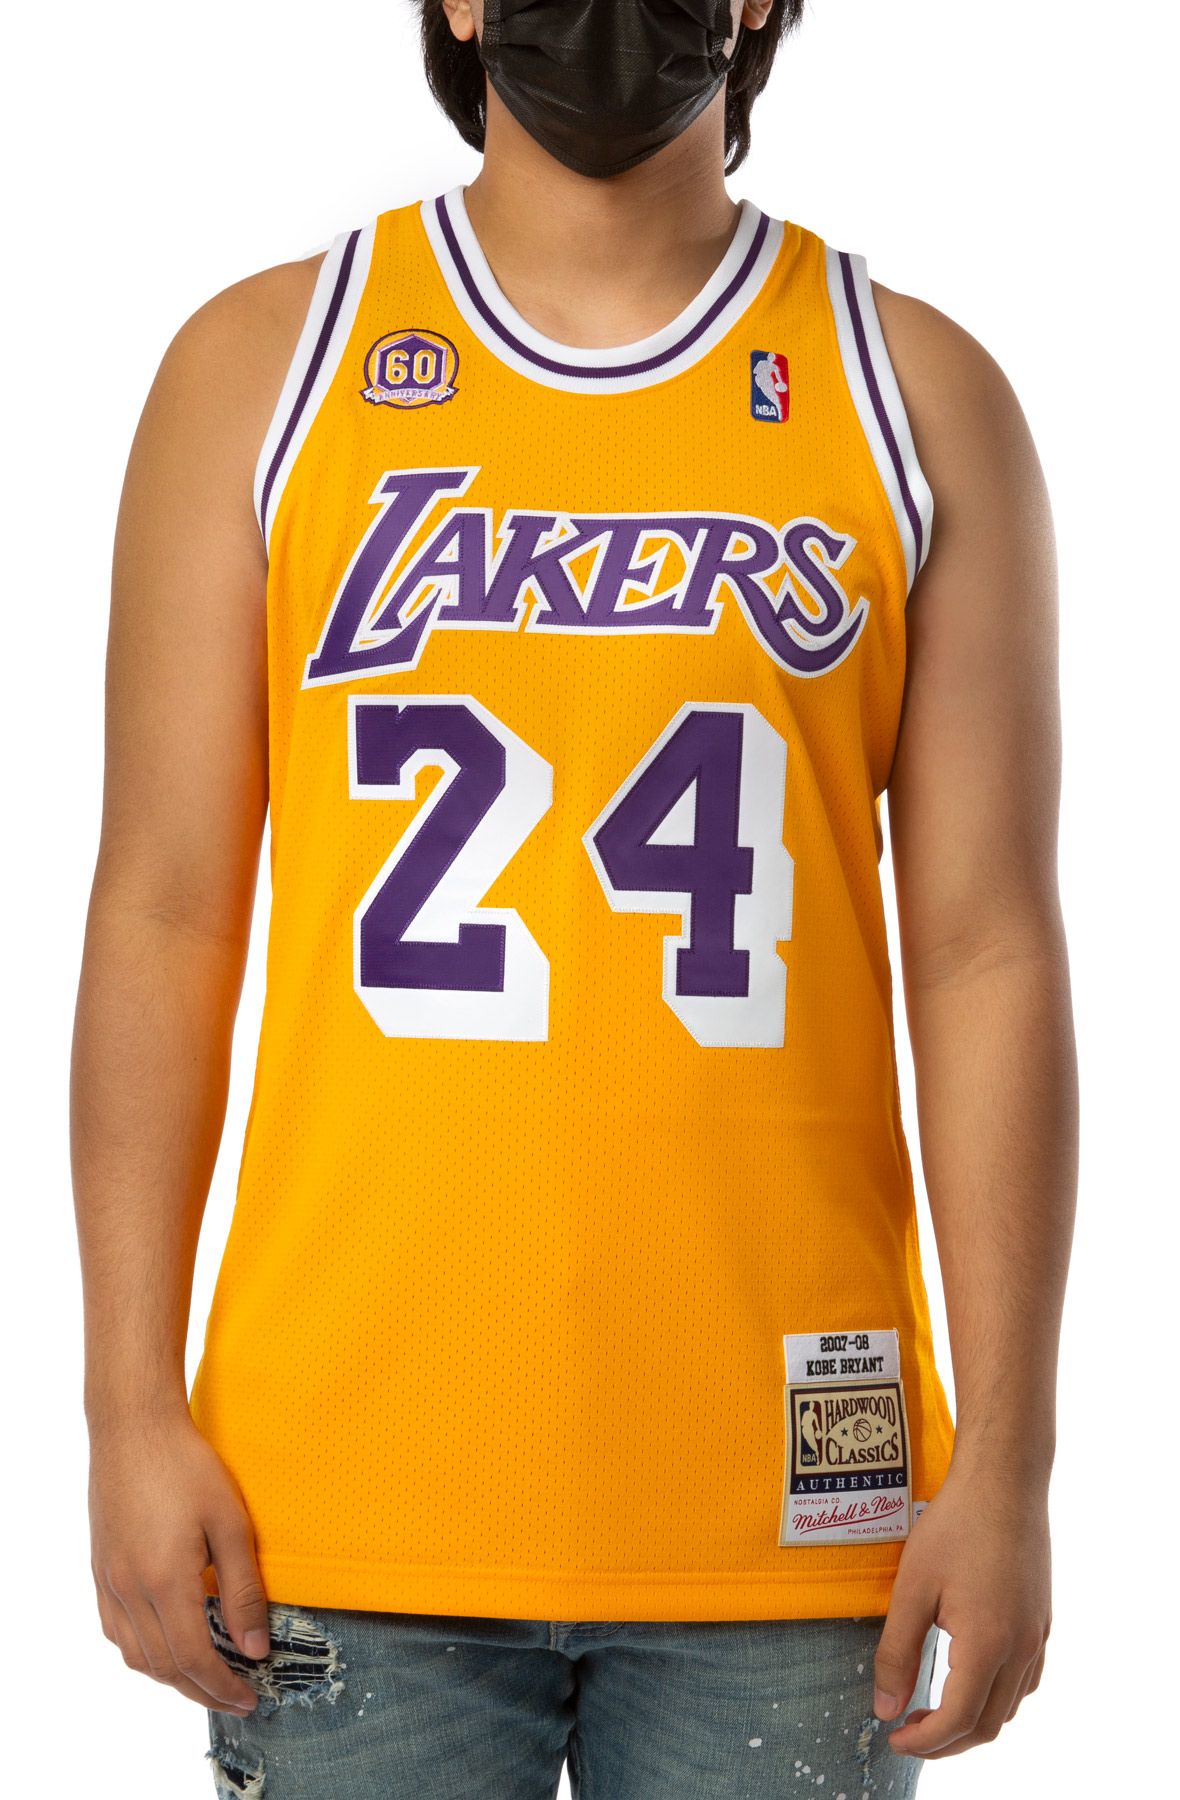 Mitchell & Ness NBA KOBE BRYANT LA LAKERS #8 AUTHENTIC JERSEY – DTLR